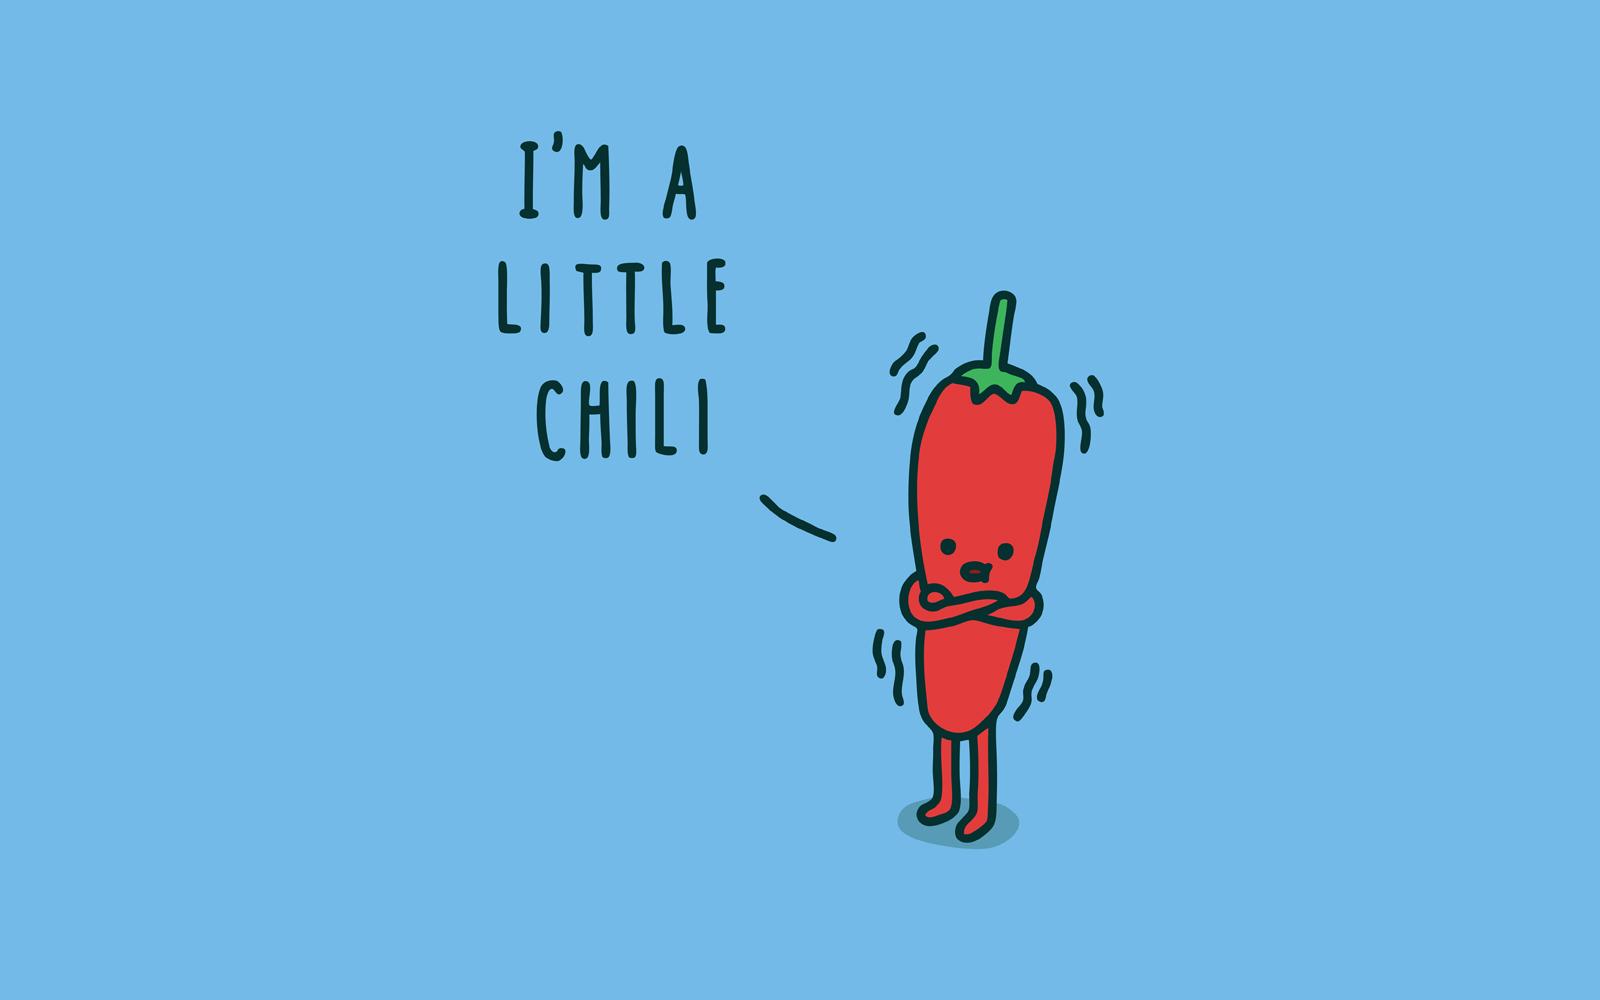 A little Chily - illustration by Jaco Haasbroek